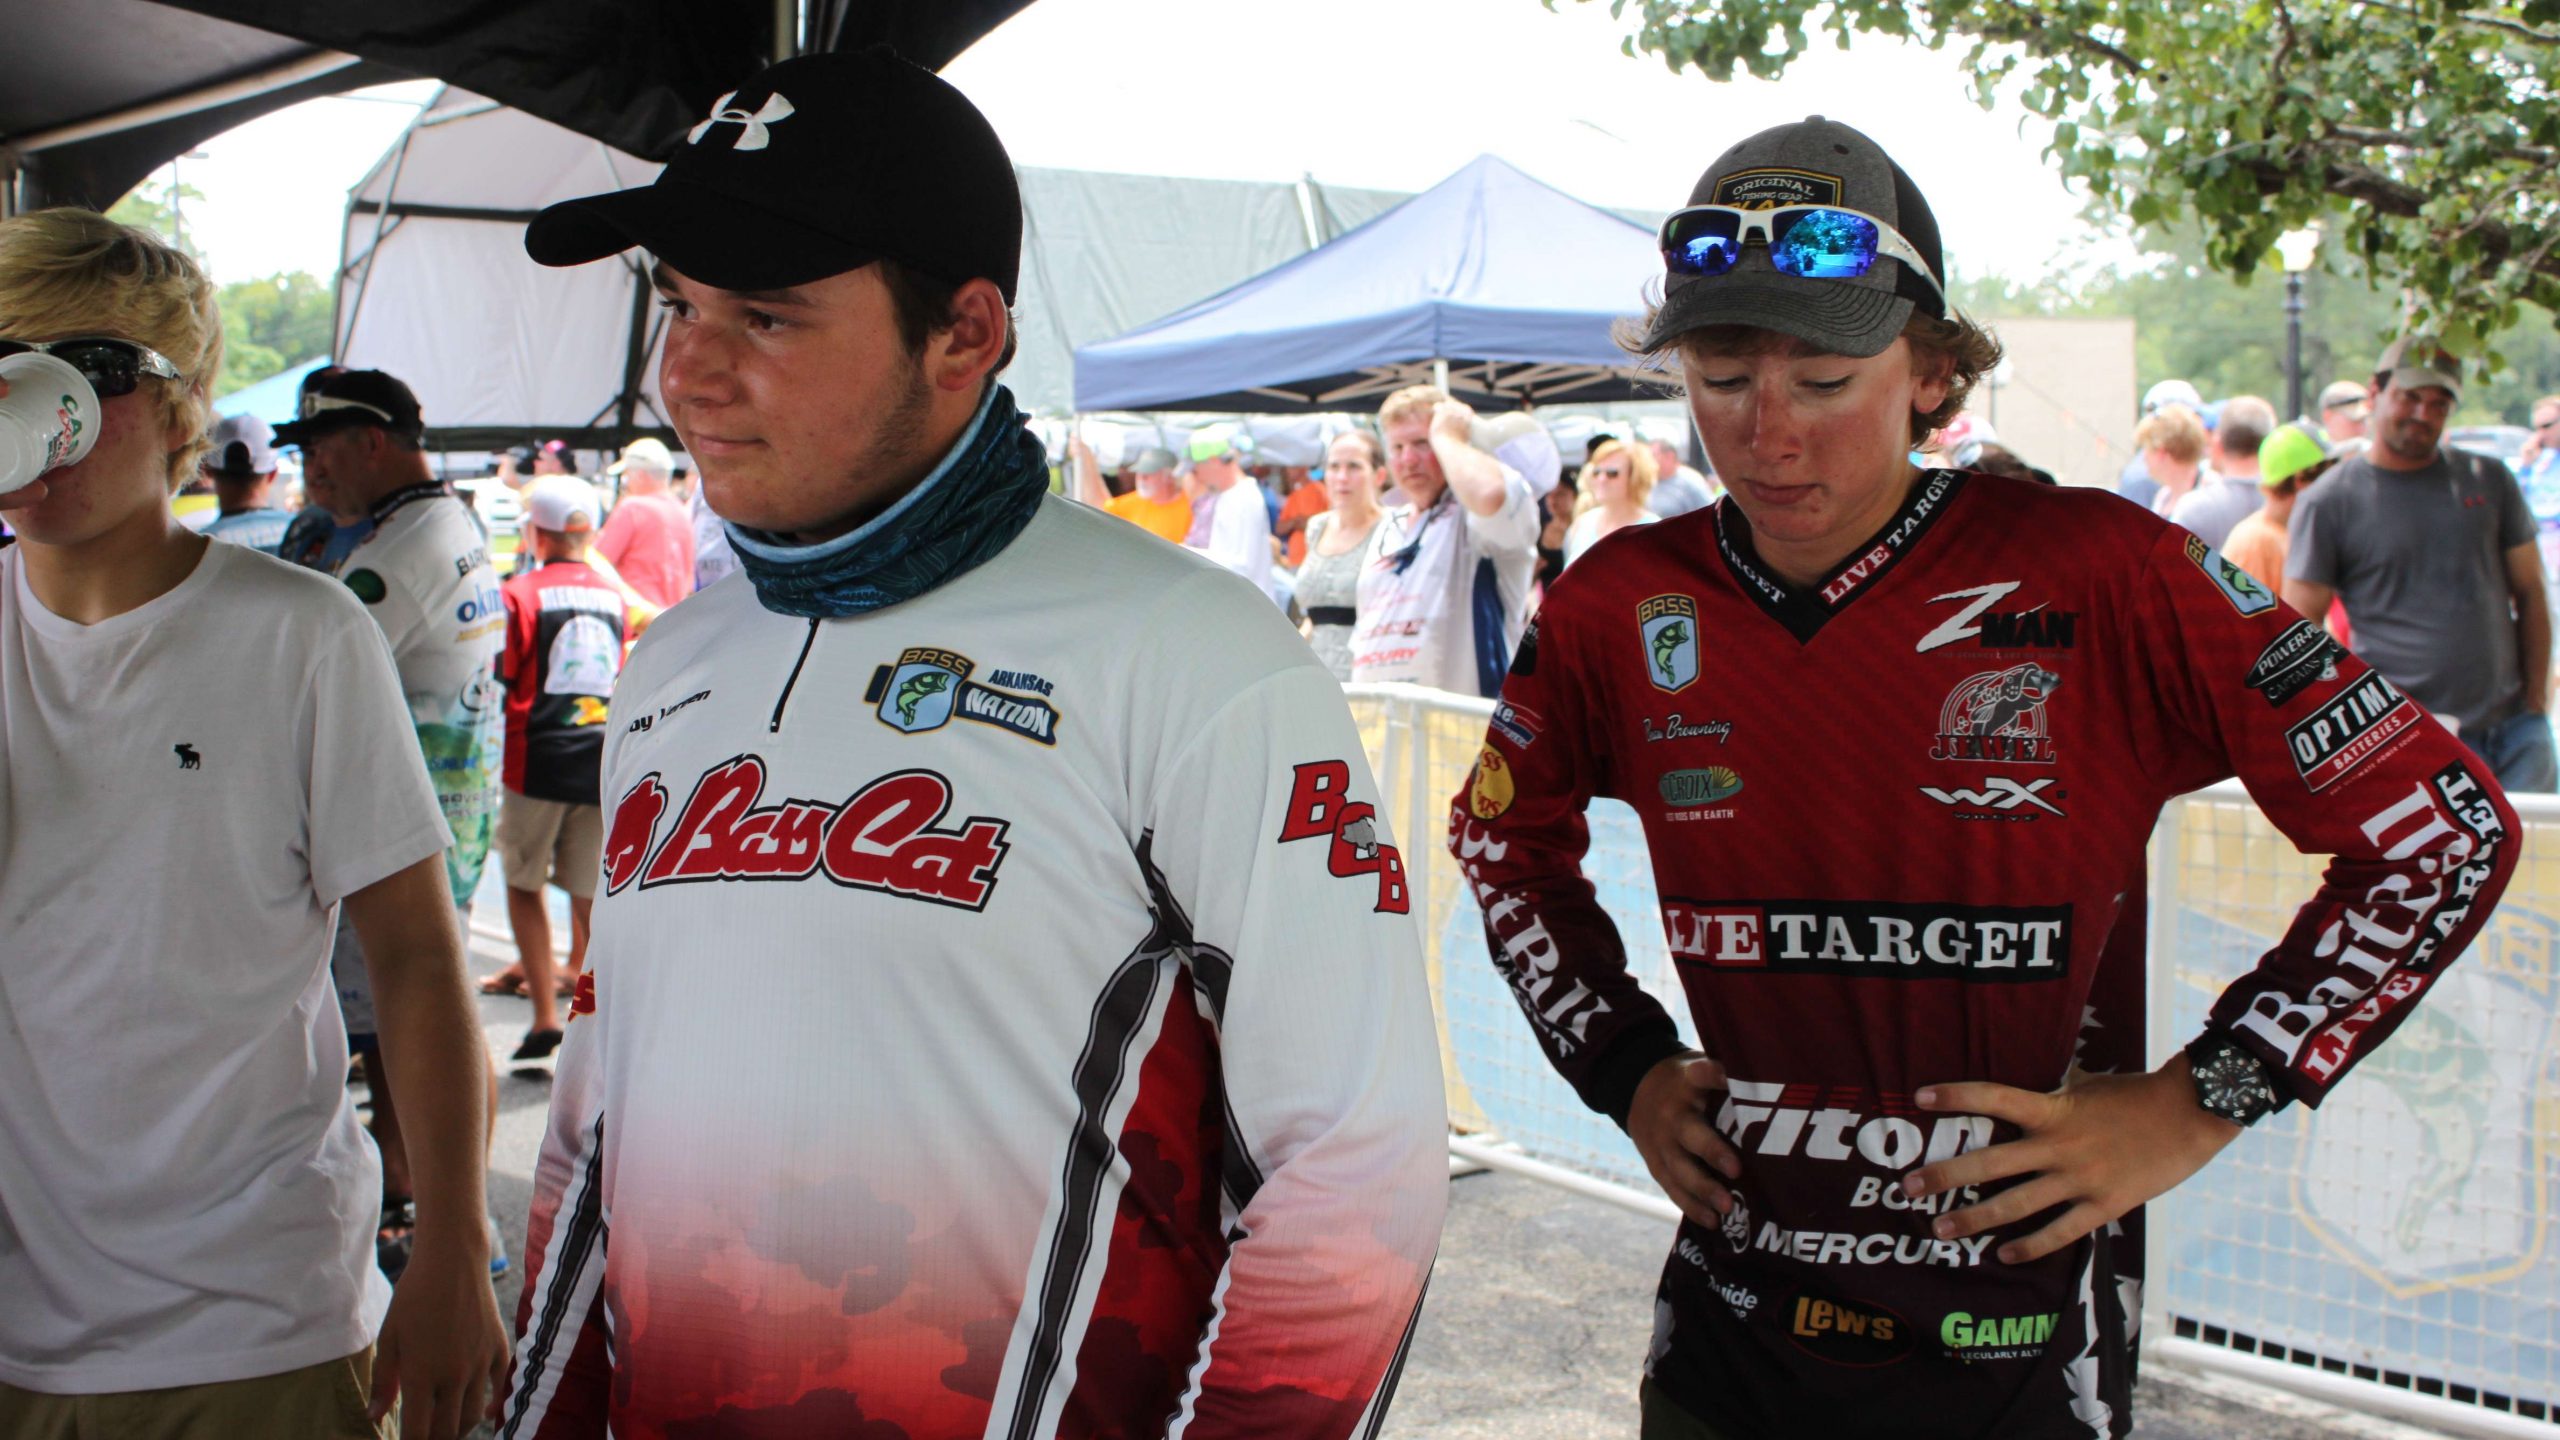 Vereen and Beau Browning of Team Arkansas had a nice bag on Wednesday, but would it be enough to win a title? They seemed a little bit pensive backstage.